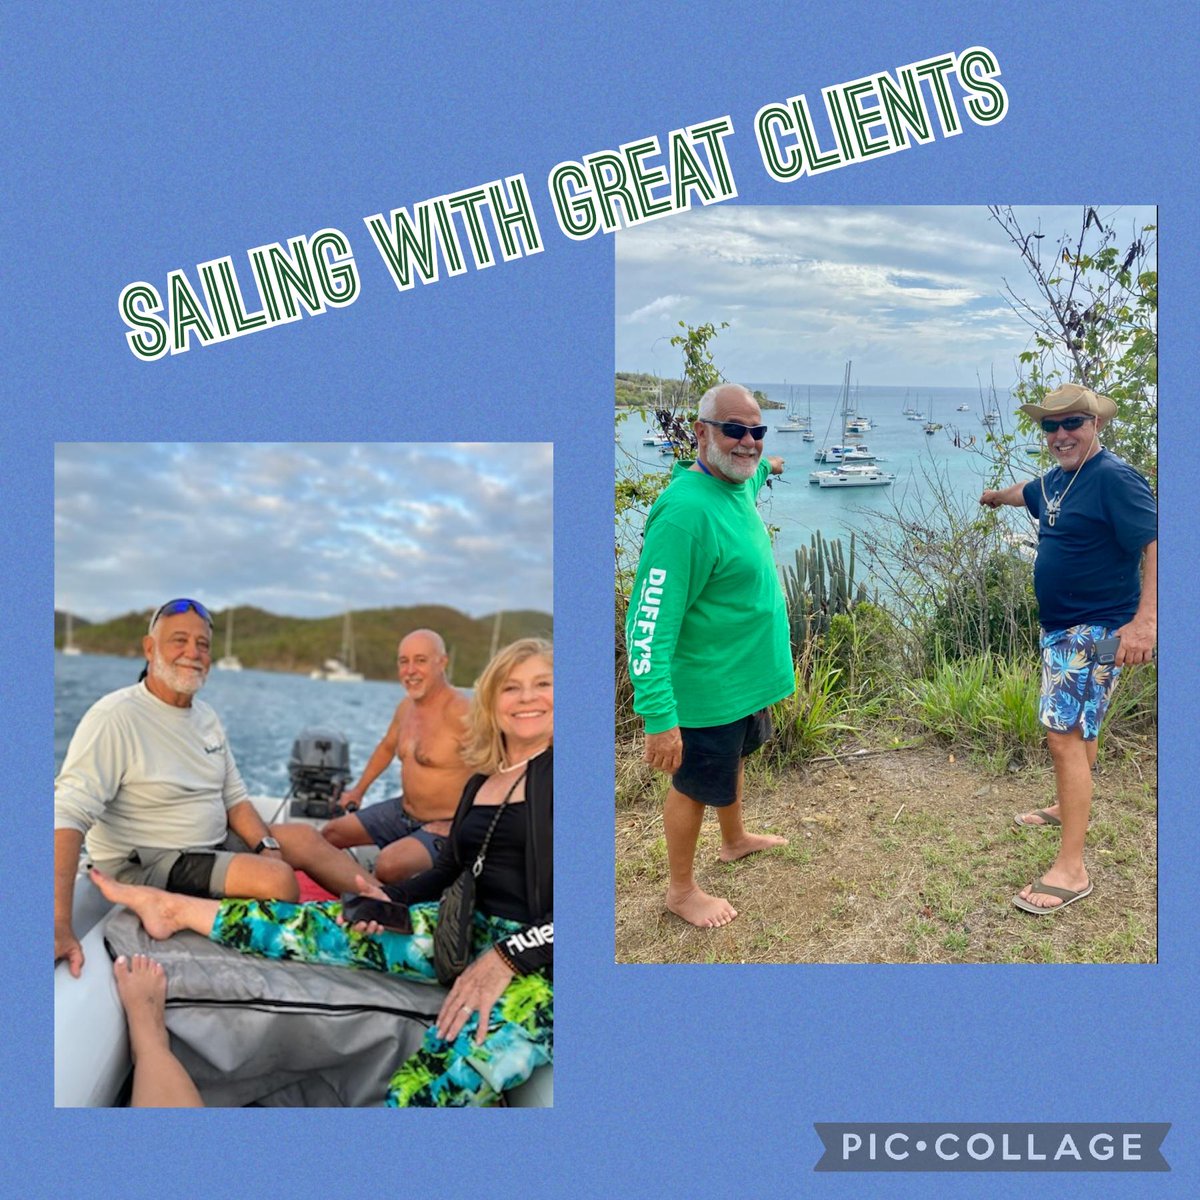 Gema and I recently had the pleasure of being included on a great sailing voyage in the US Virgin Islands. It was nice to spend time with a friend and owner of VistaColor based in Miami, FL. Thank you, Henry, for being a great host!